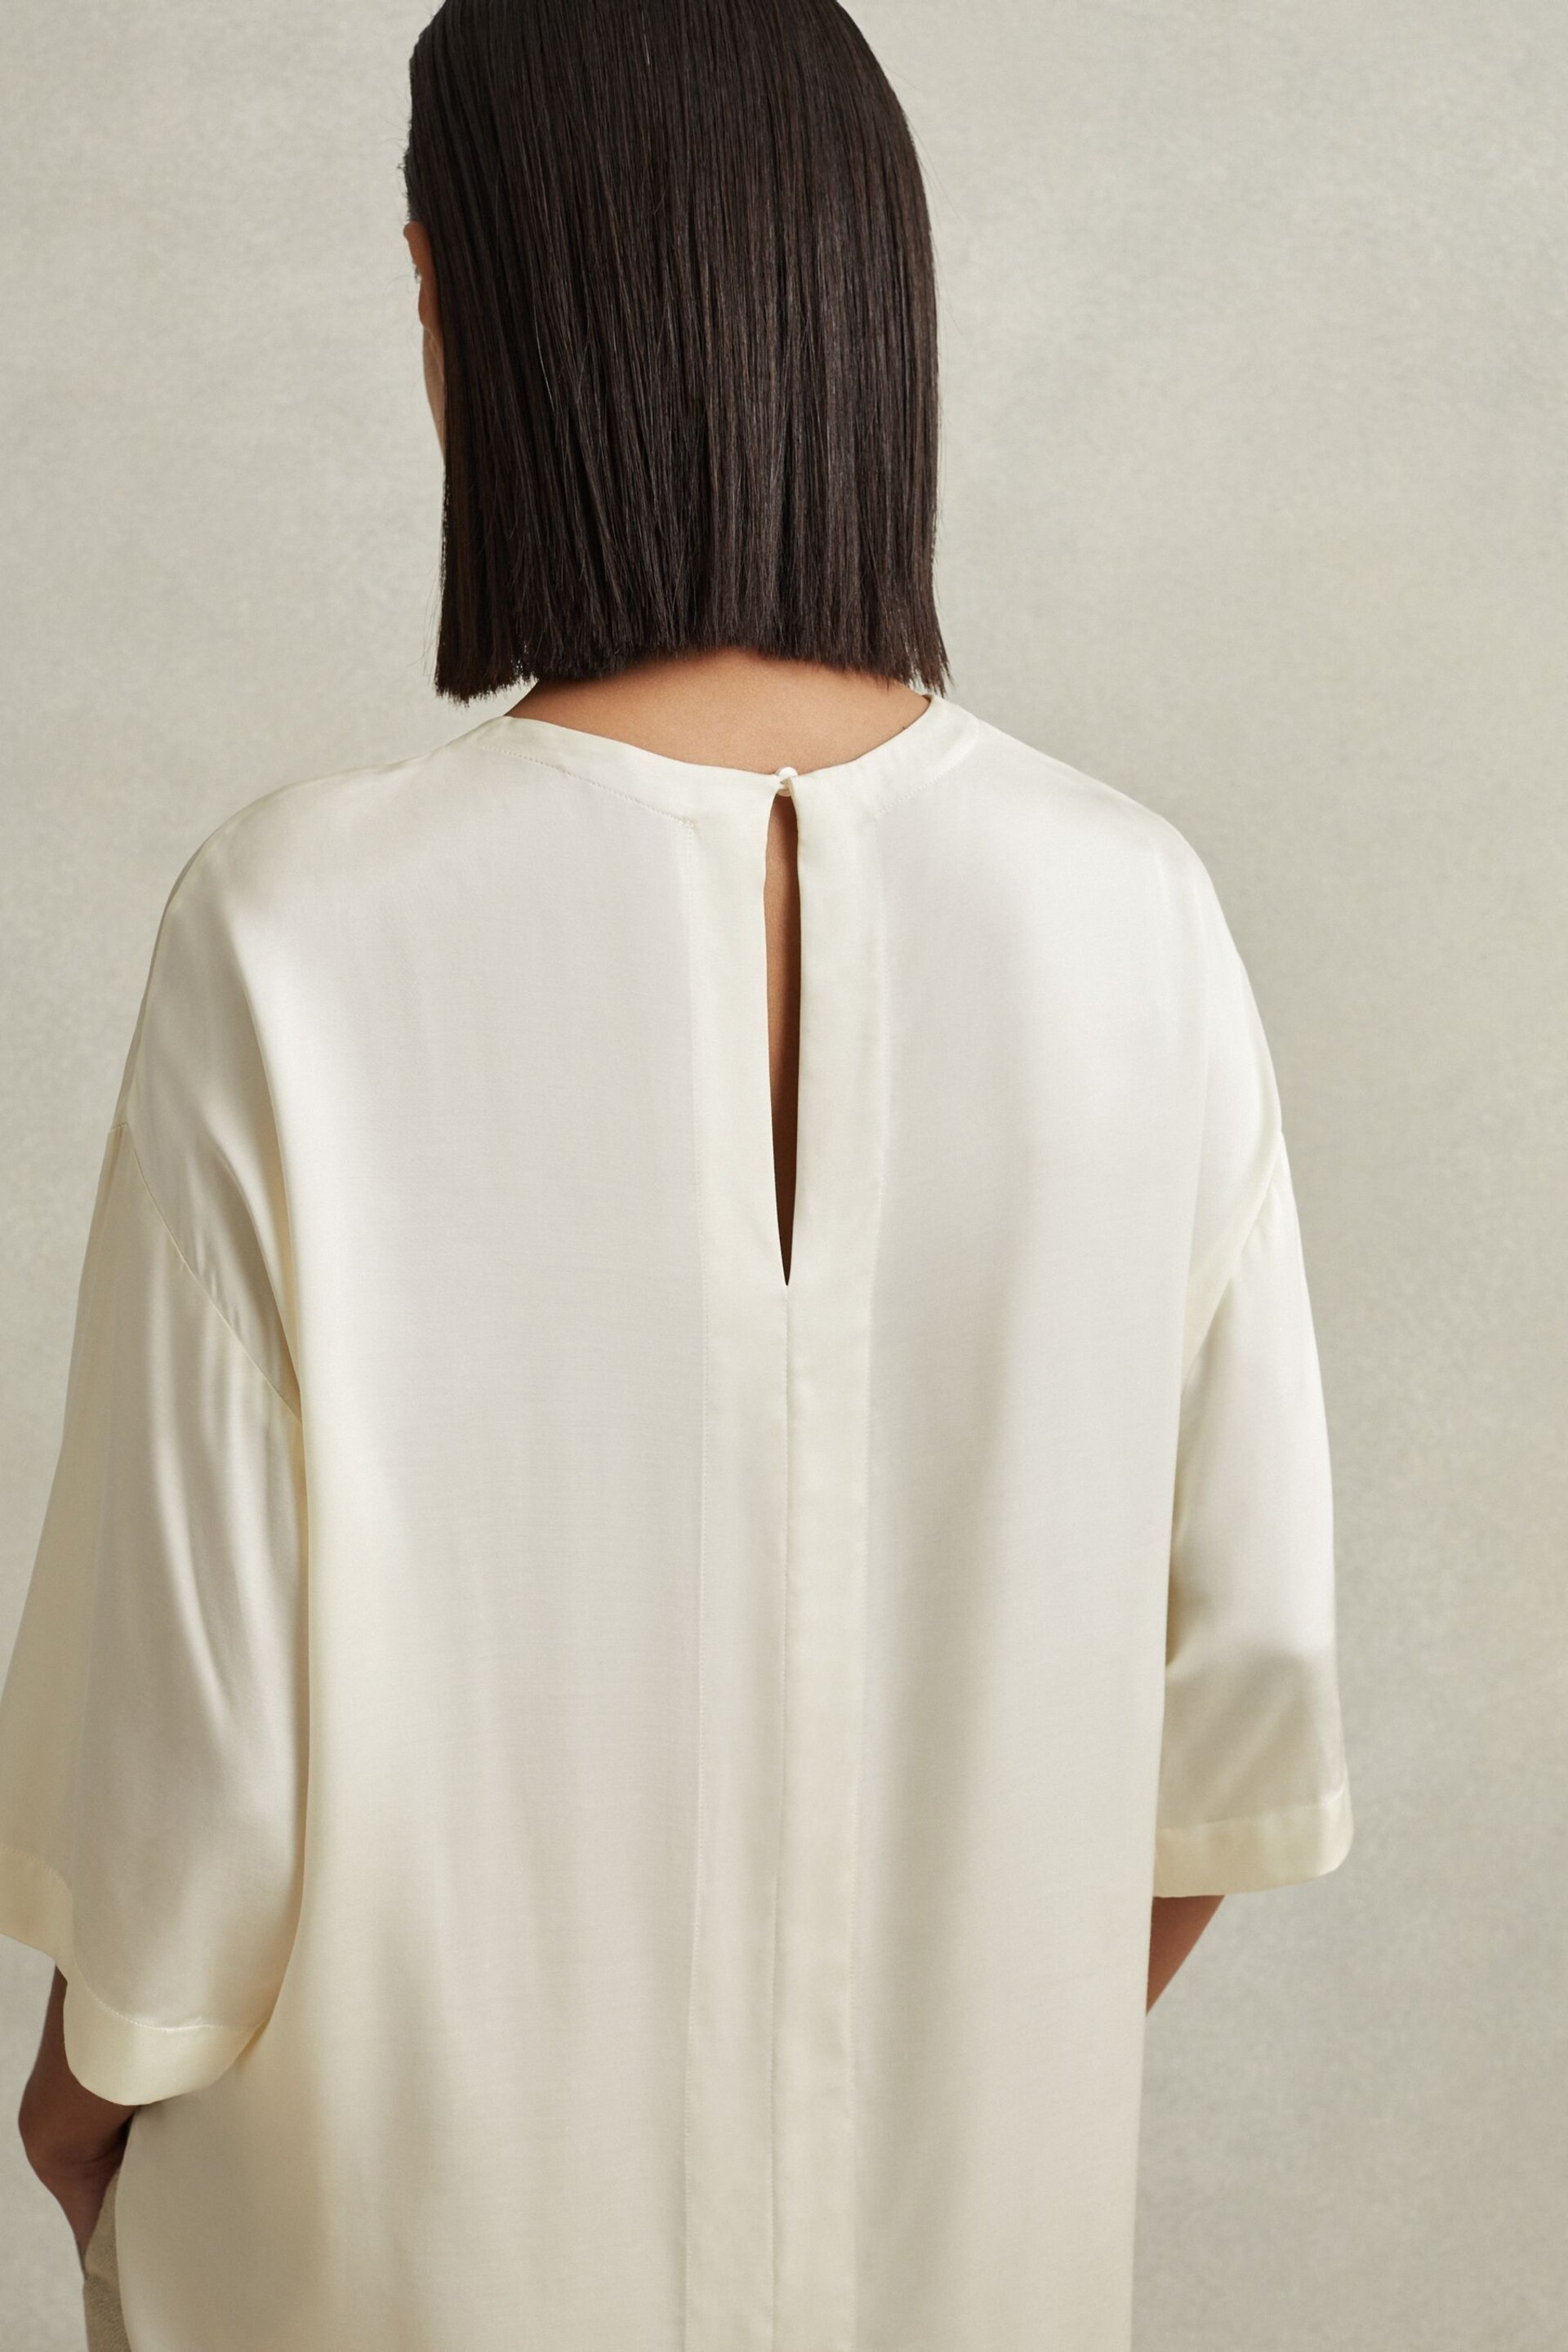 Reiss Ivory Anya Relaxed Satin Blouse - Image 6 of 7